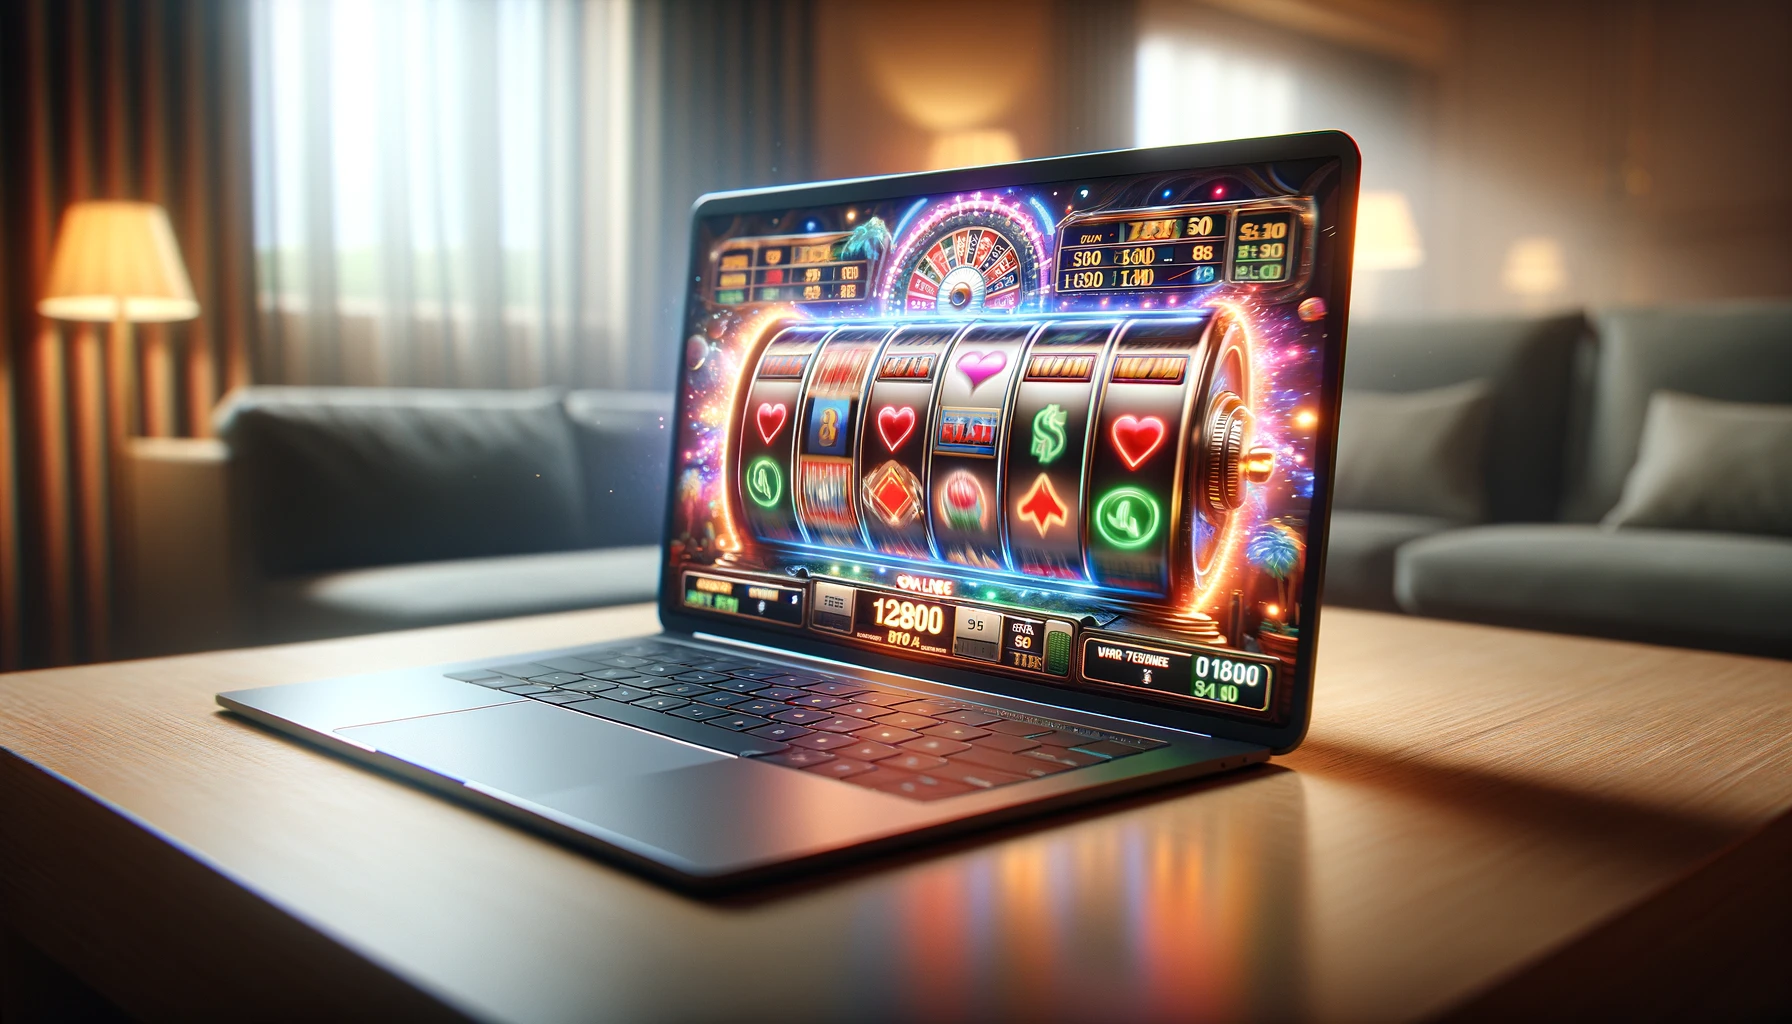 A realistic photo image of a laptop screen displaying spinning reels of online slots. The image should capture the dynamic and colorful aspect of the